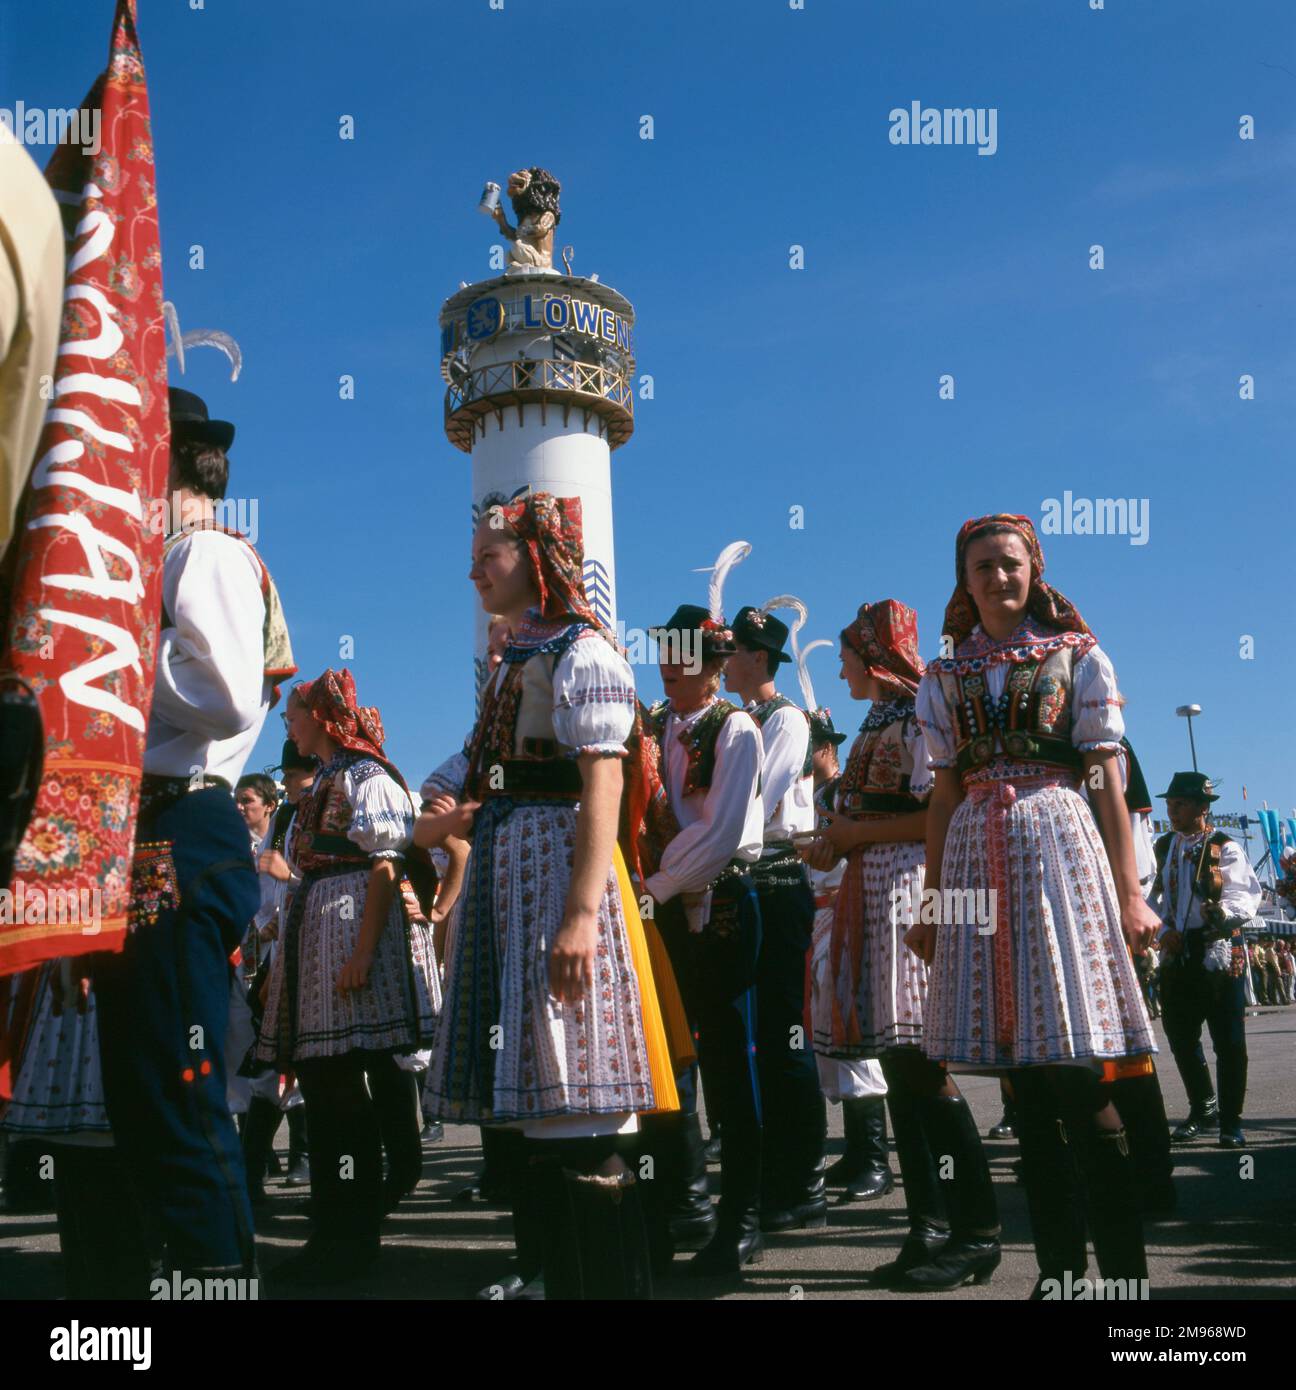 Scene at the Oktoberfest in Munich, Germany, with people in folk costume and the tower of the Lowenbrau Brewery in the background. Stock Photo